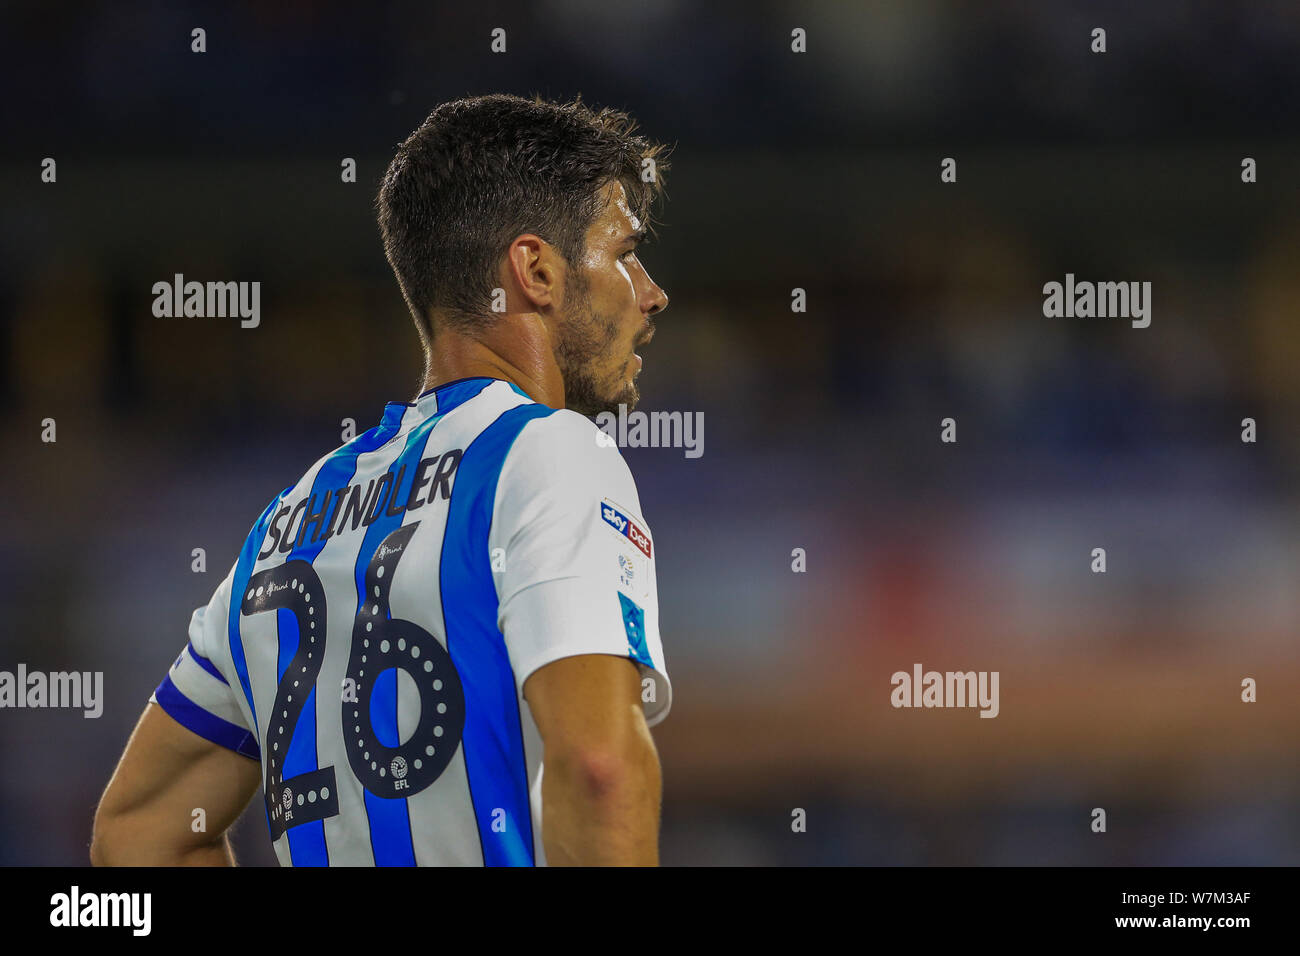 5th August 2019, John Smiths Stadium, Huddersfield England; Sky Bet Championship, Huddersfield Town vs Derby County ; Christopher Schindler (26) of Huddersfield Town during the game  Credit: Mark Cosgrove/News Images  English Football League images are subject to DataCo Licence Stock Photo